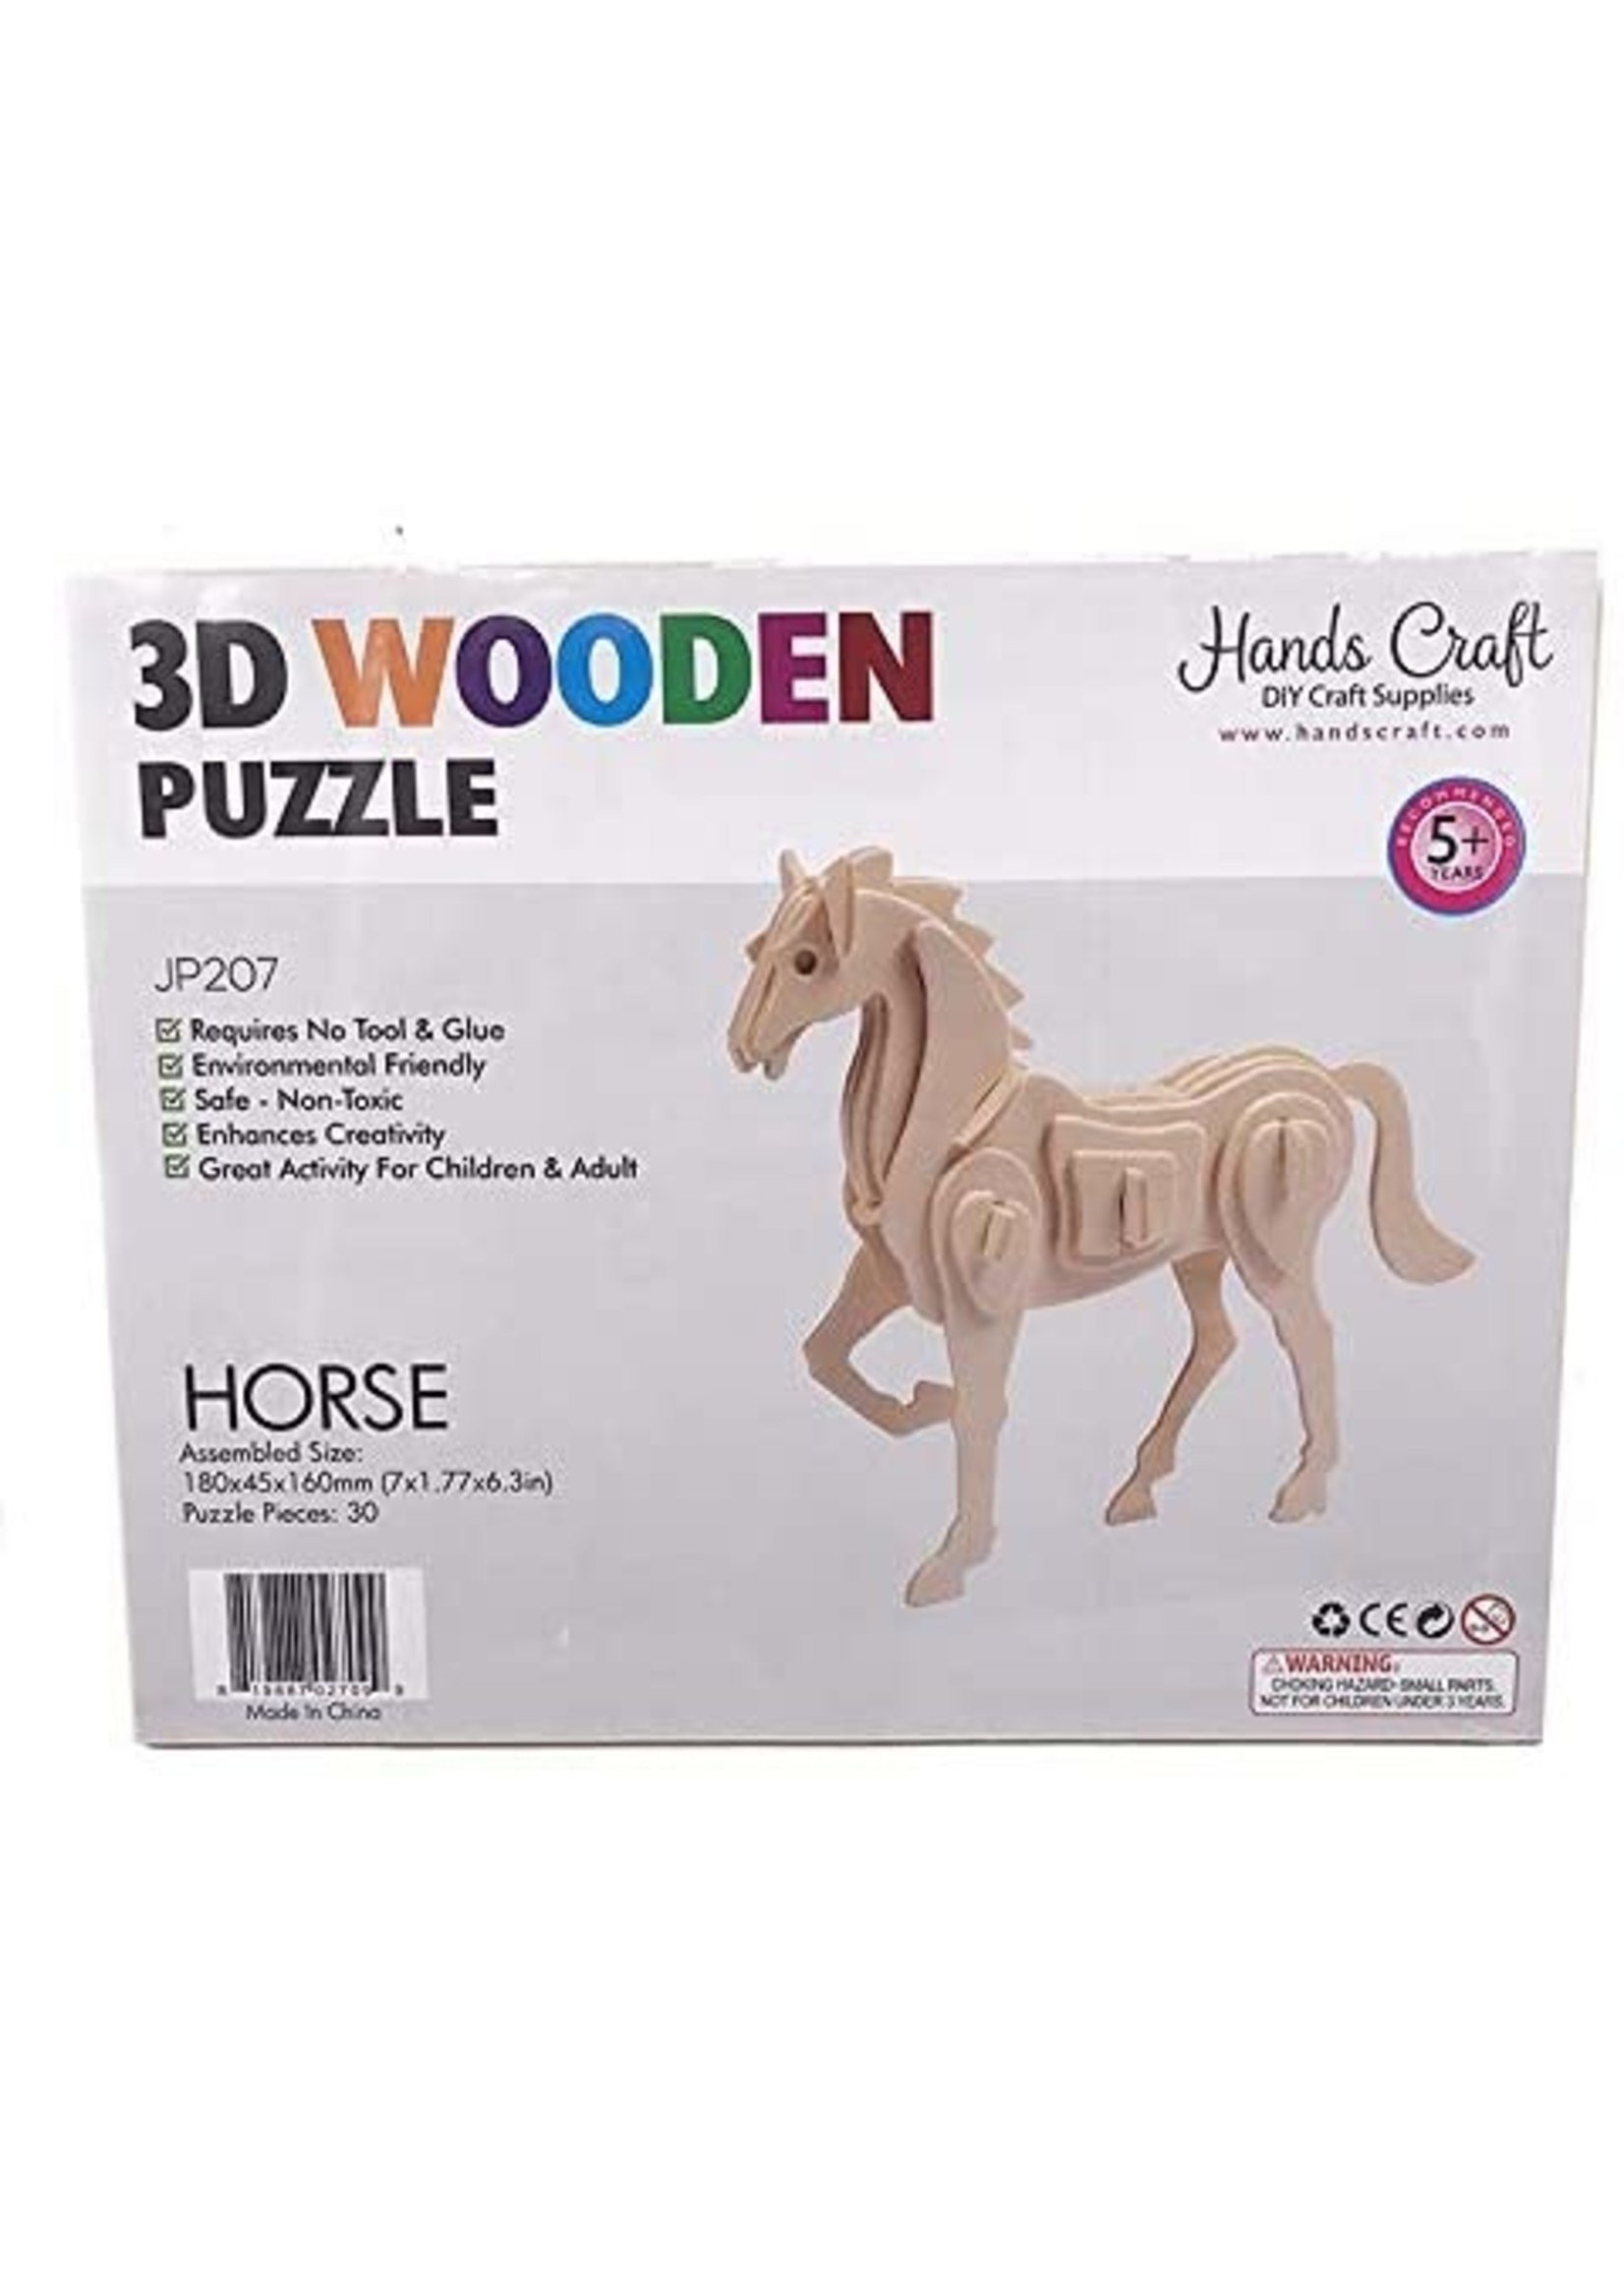 3D Wooden Puzzle by Hands Craft Horse 